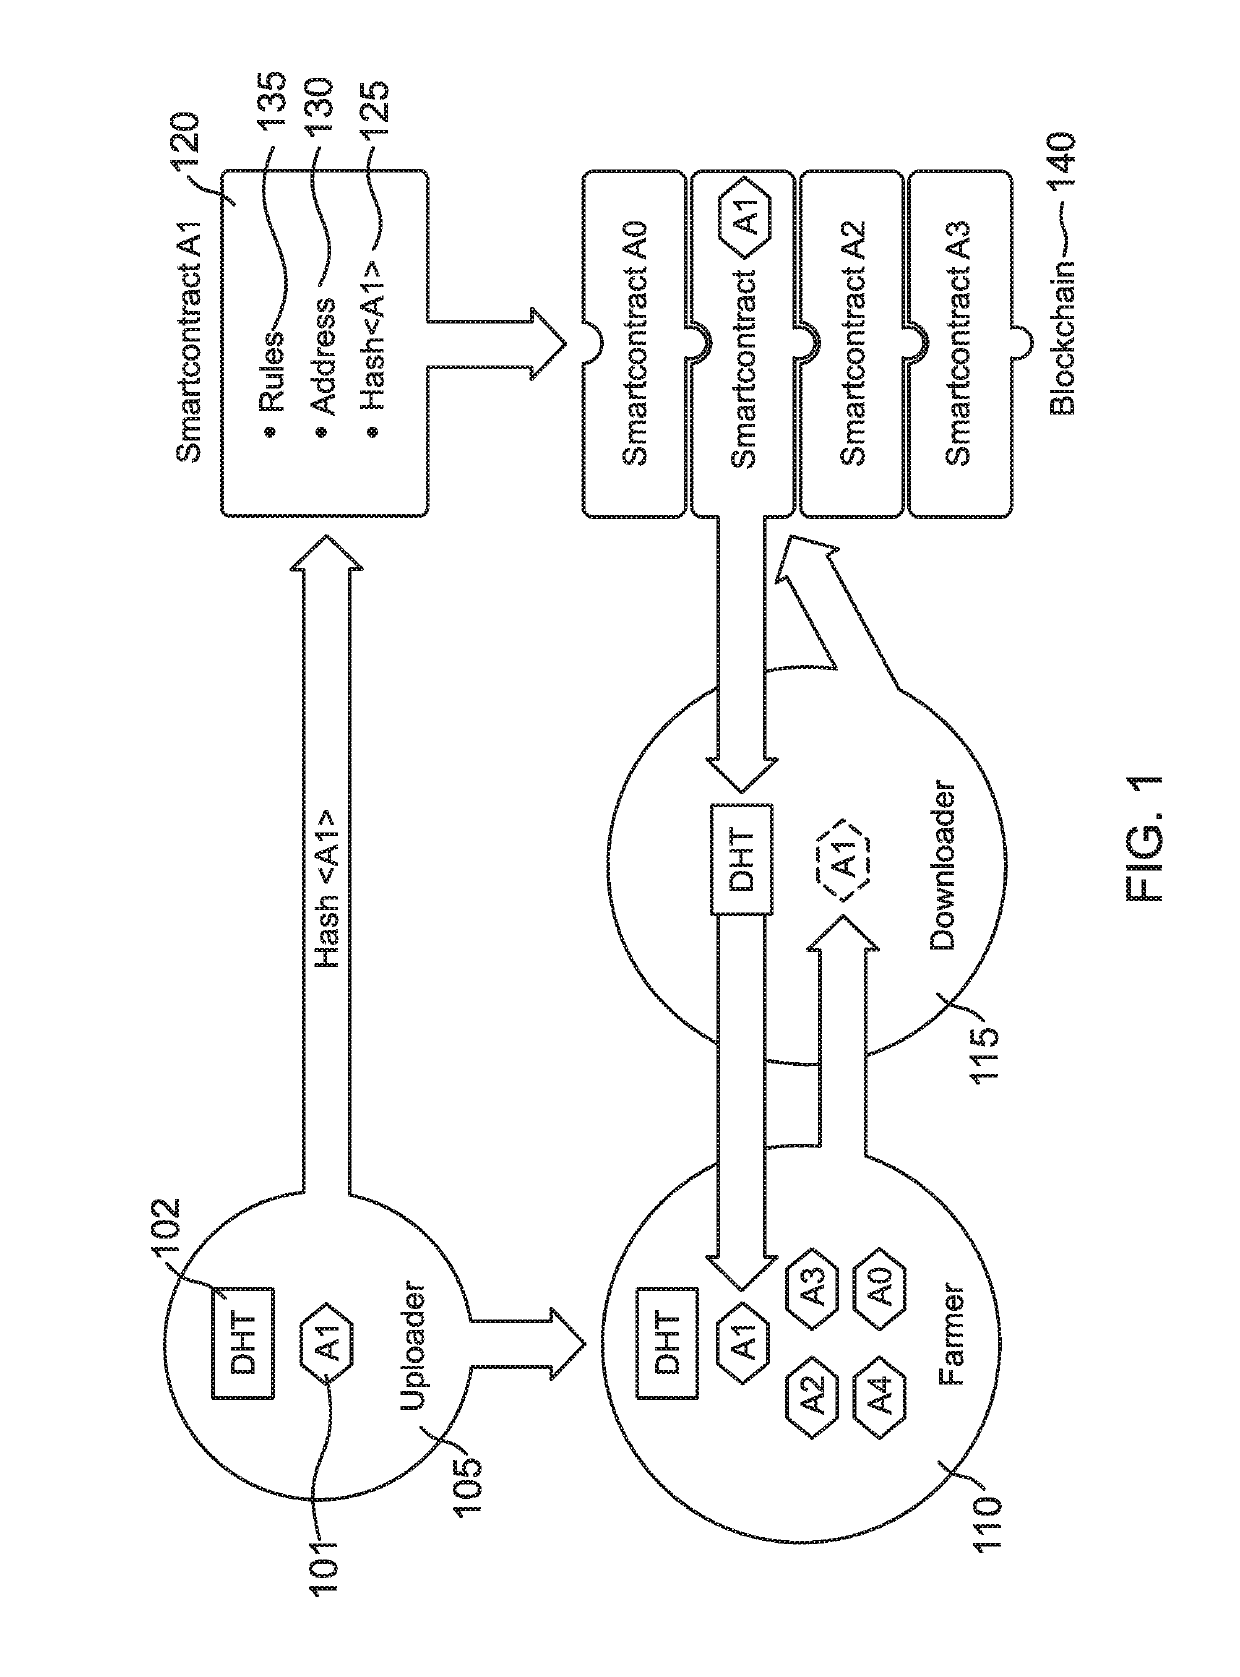 System and Method for a Blockchain-Supported Programmable Information Management and Data Distribution System